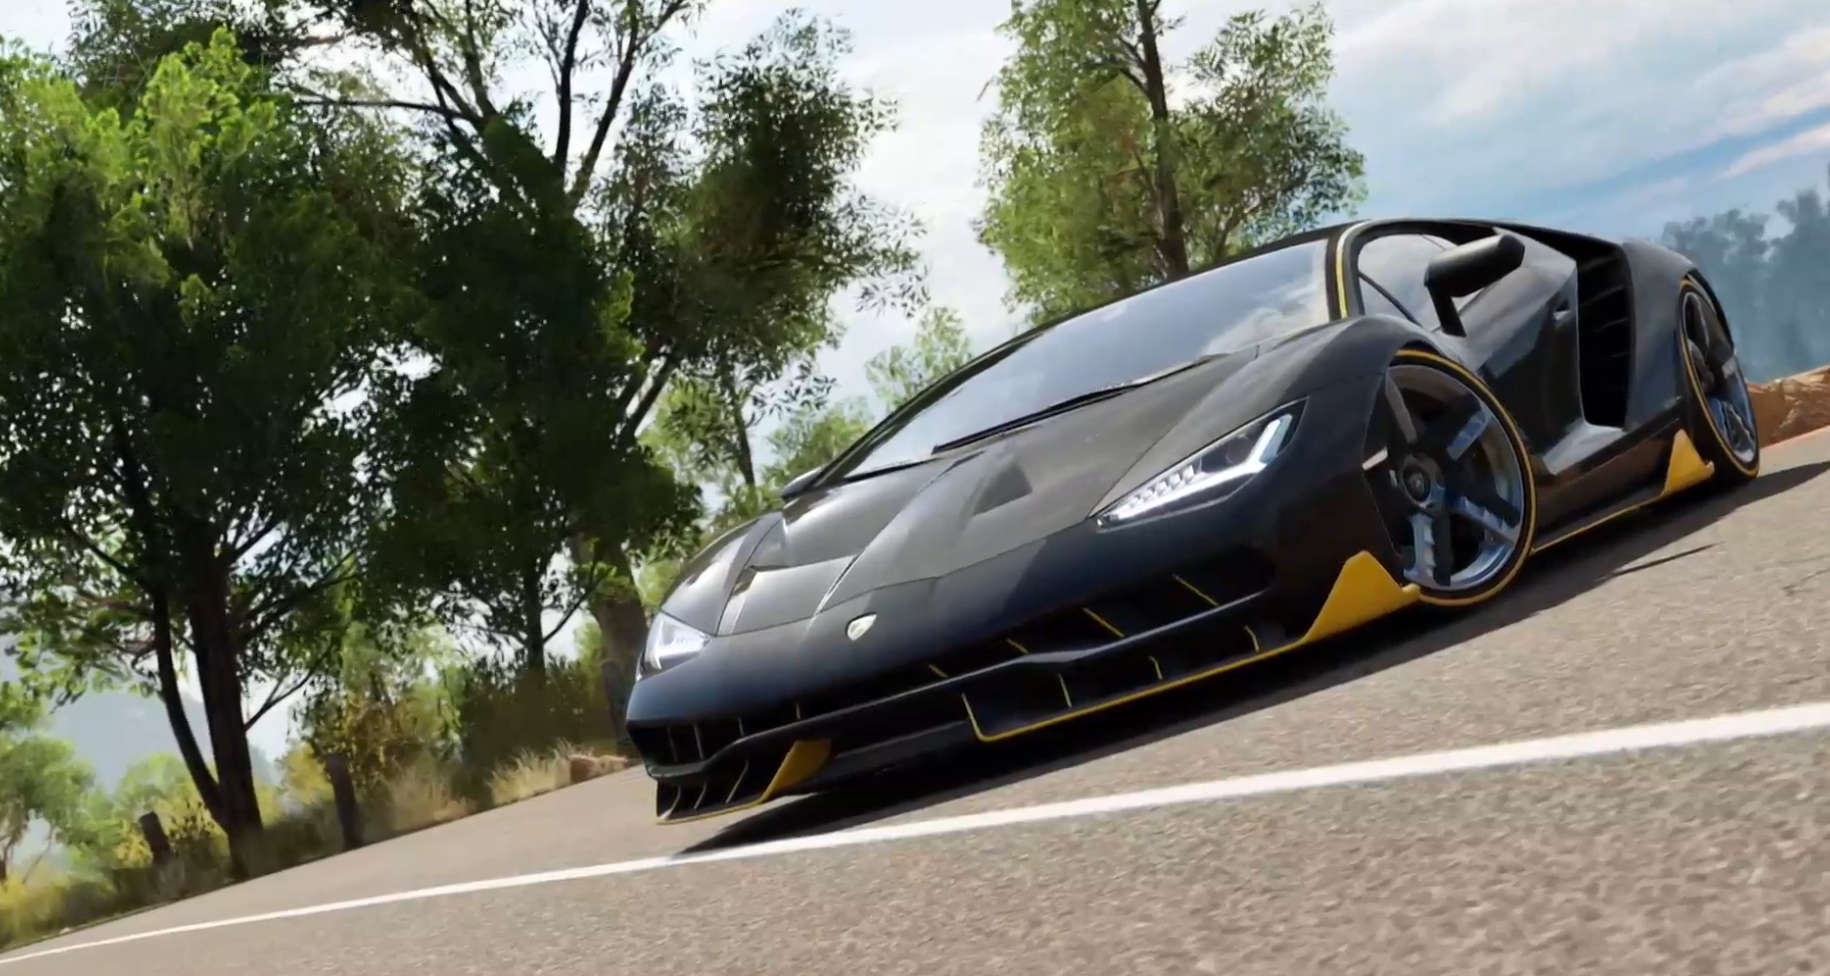 Forza Horizon 3 is 30fps on Xbox, unlocked with 4K resolution on PC